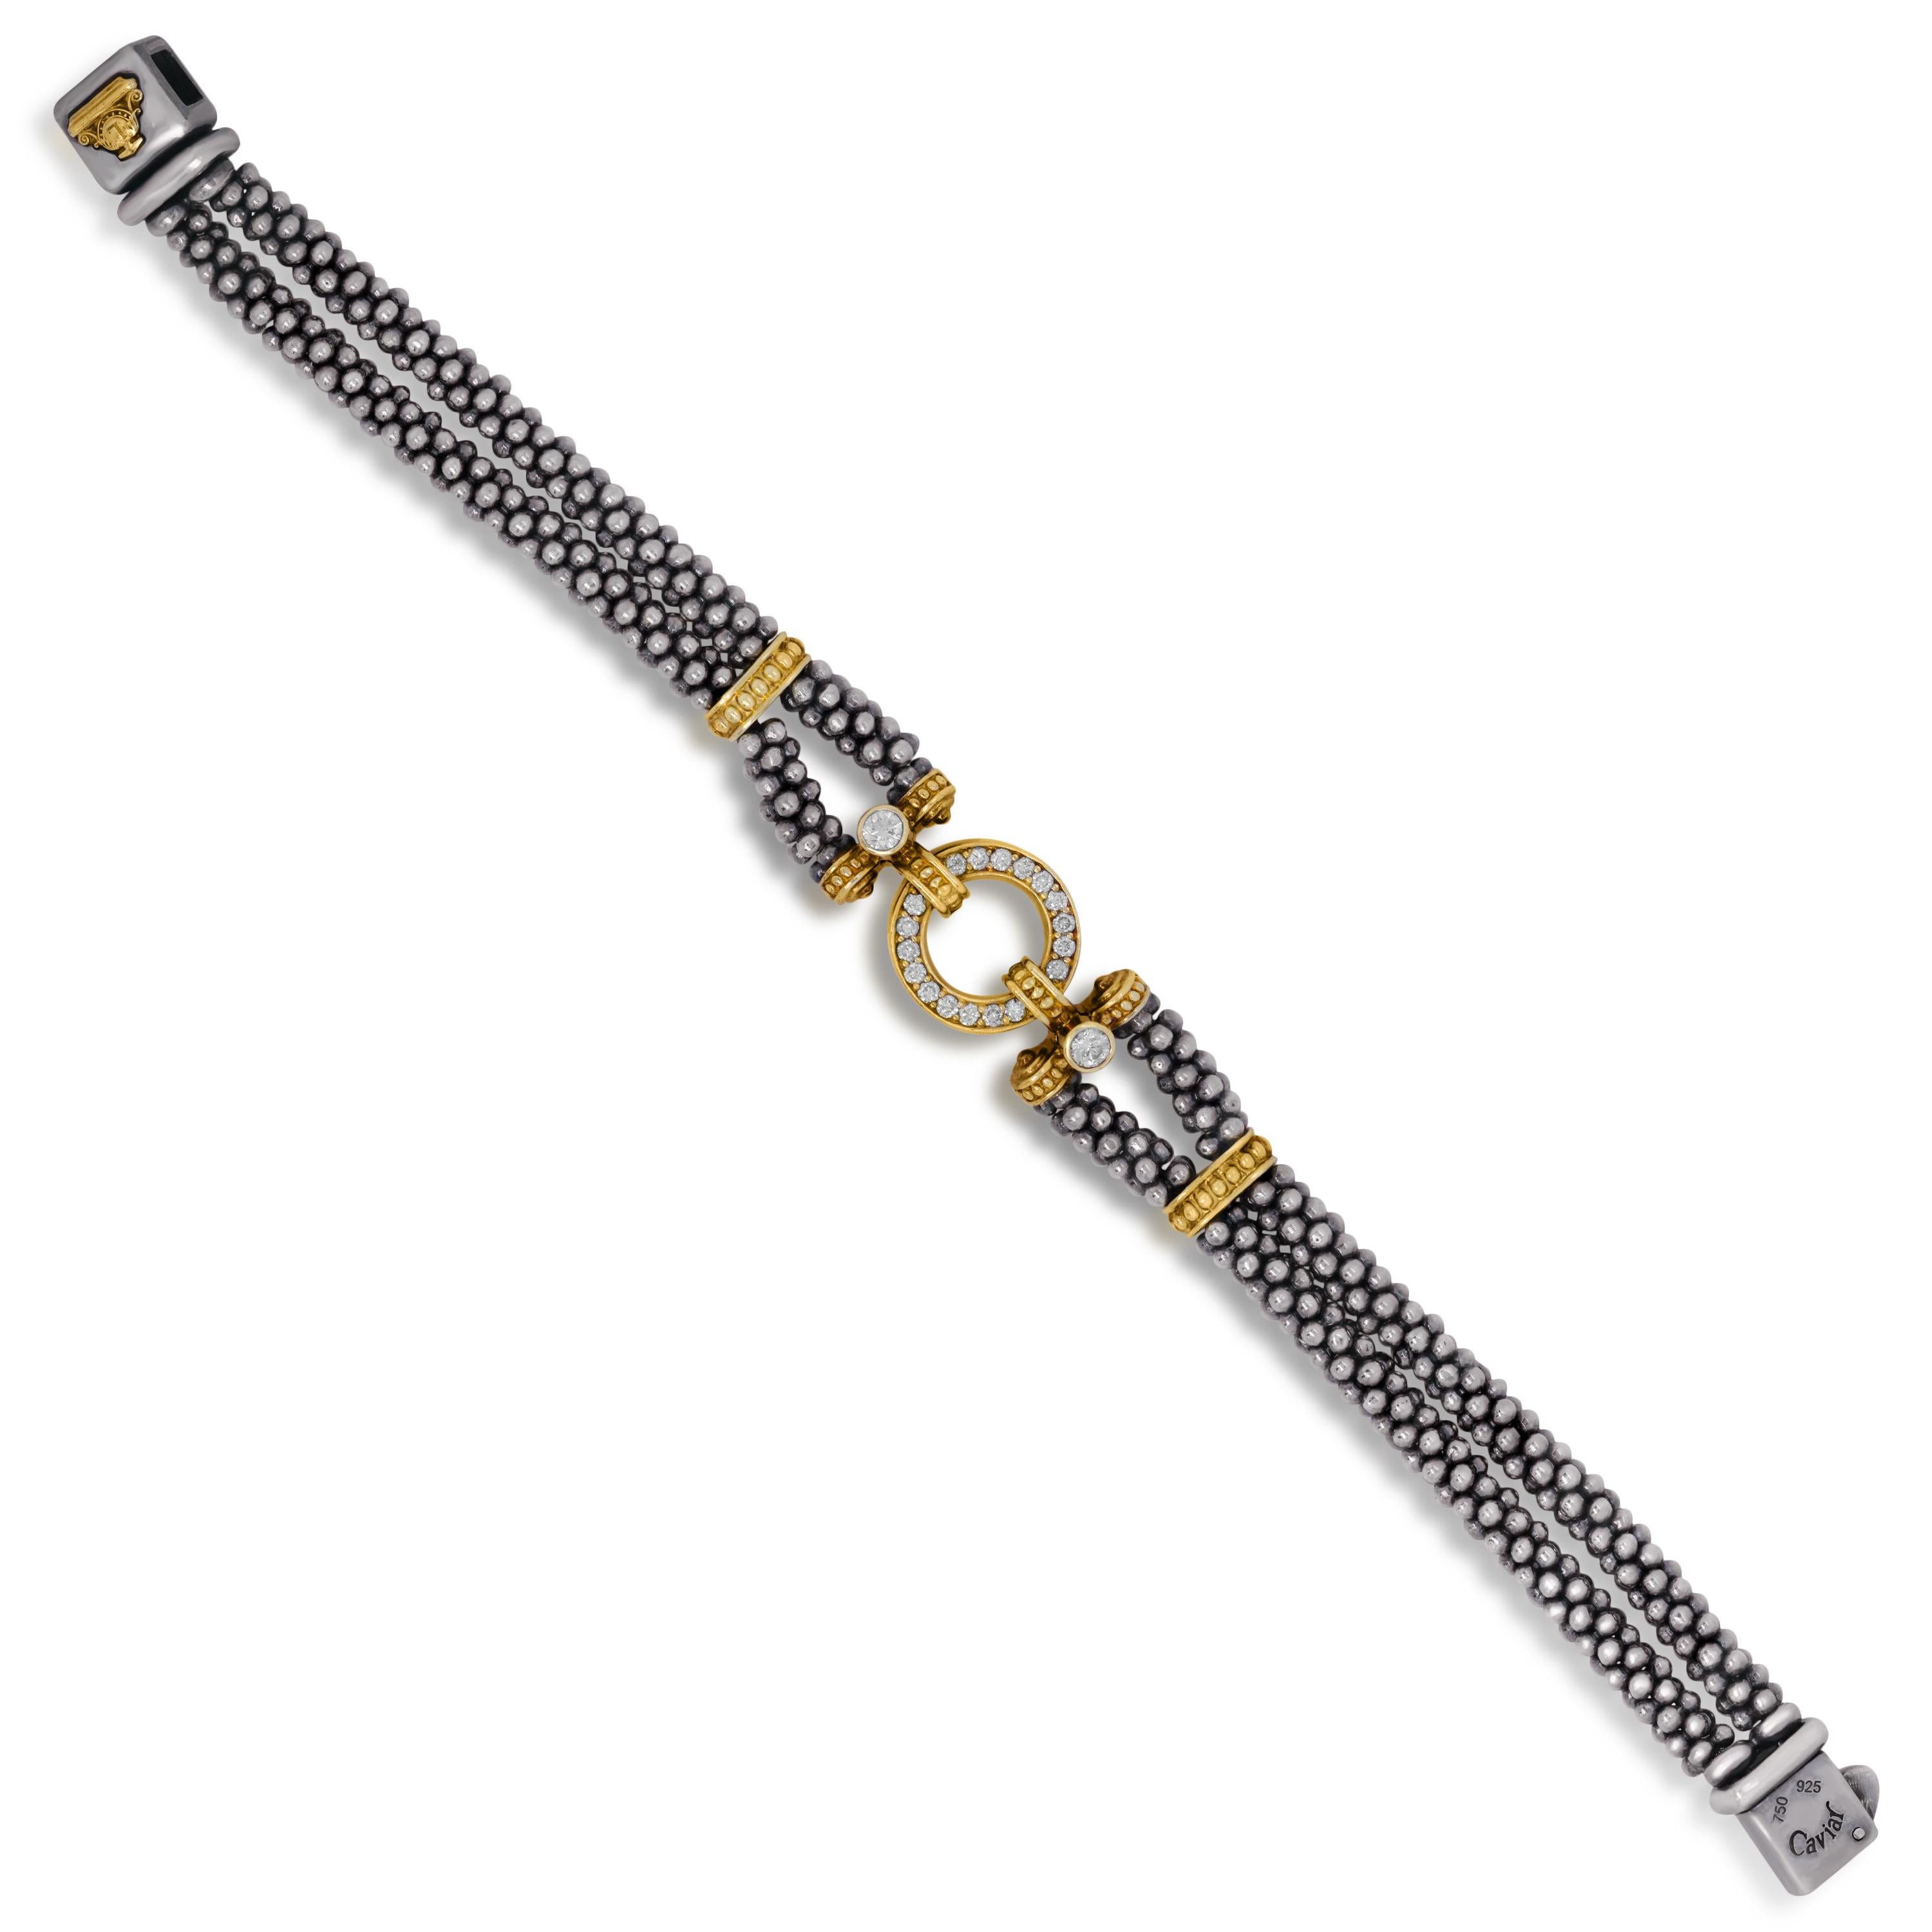 Lagos Sterling Silver 18 Karat Gold Diamond Enso Circle Game Caviar Bracelet

This double strand bracelet by Lagos features an 18k gold and diamond center

0.67 carat diamonds total weight

Bracelet is 7 inches in length by 0.55 inch width.

Signed